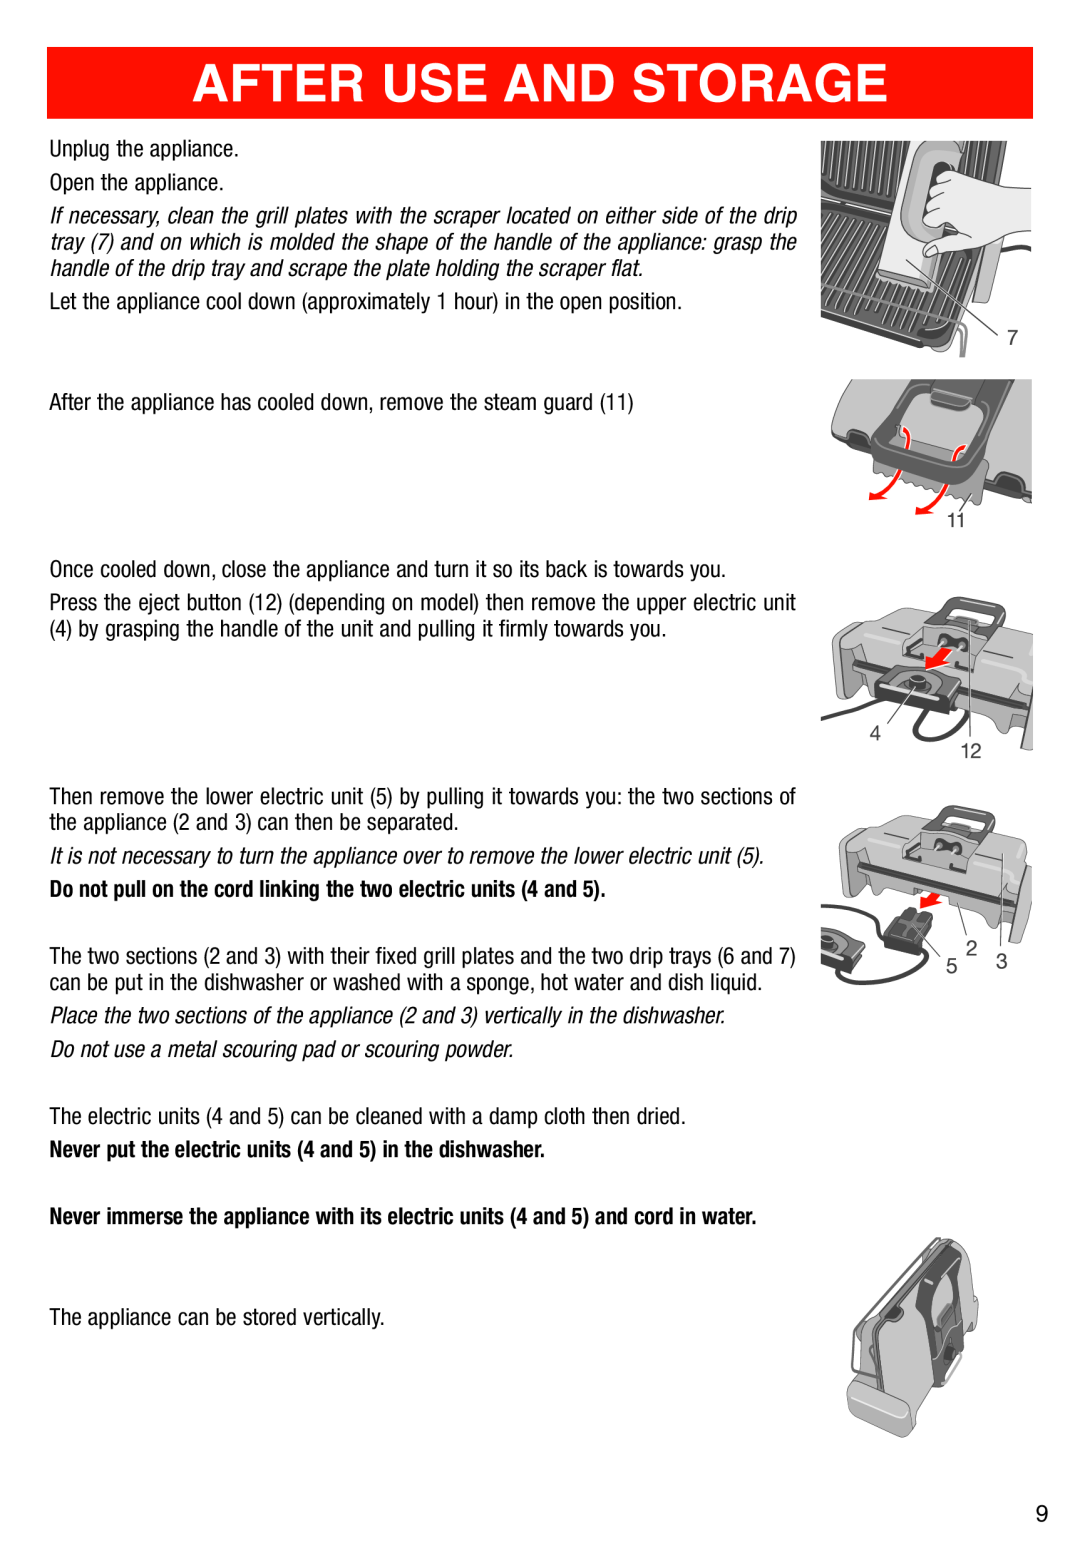 T-Fal Use Grill & Panini Maker manual After Use And Storage, Do not pull on the cord linking the two electric units 4 and 